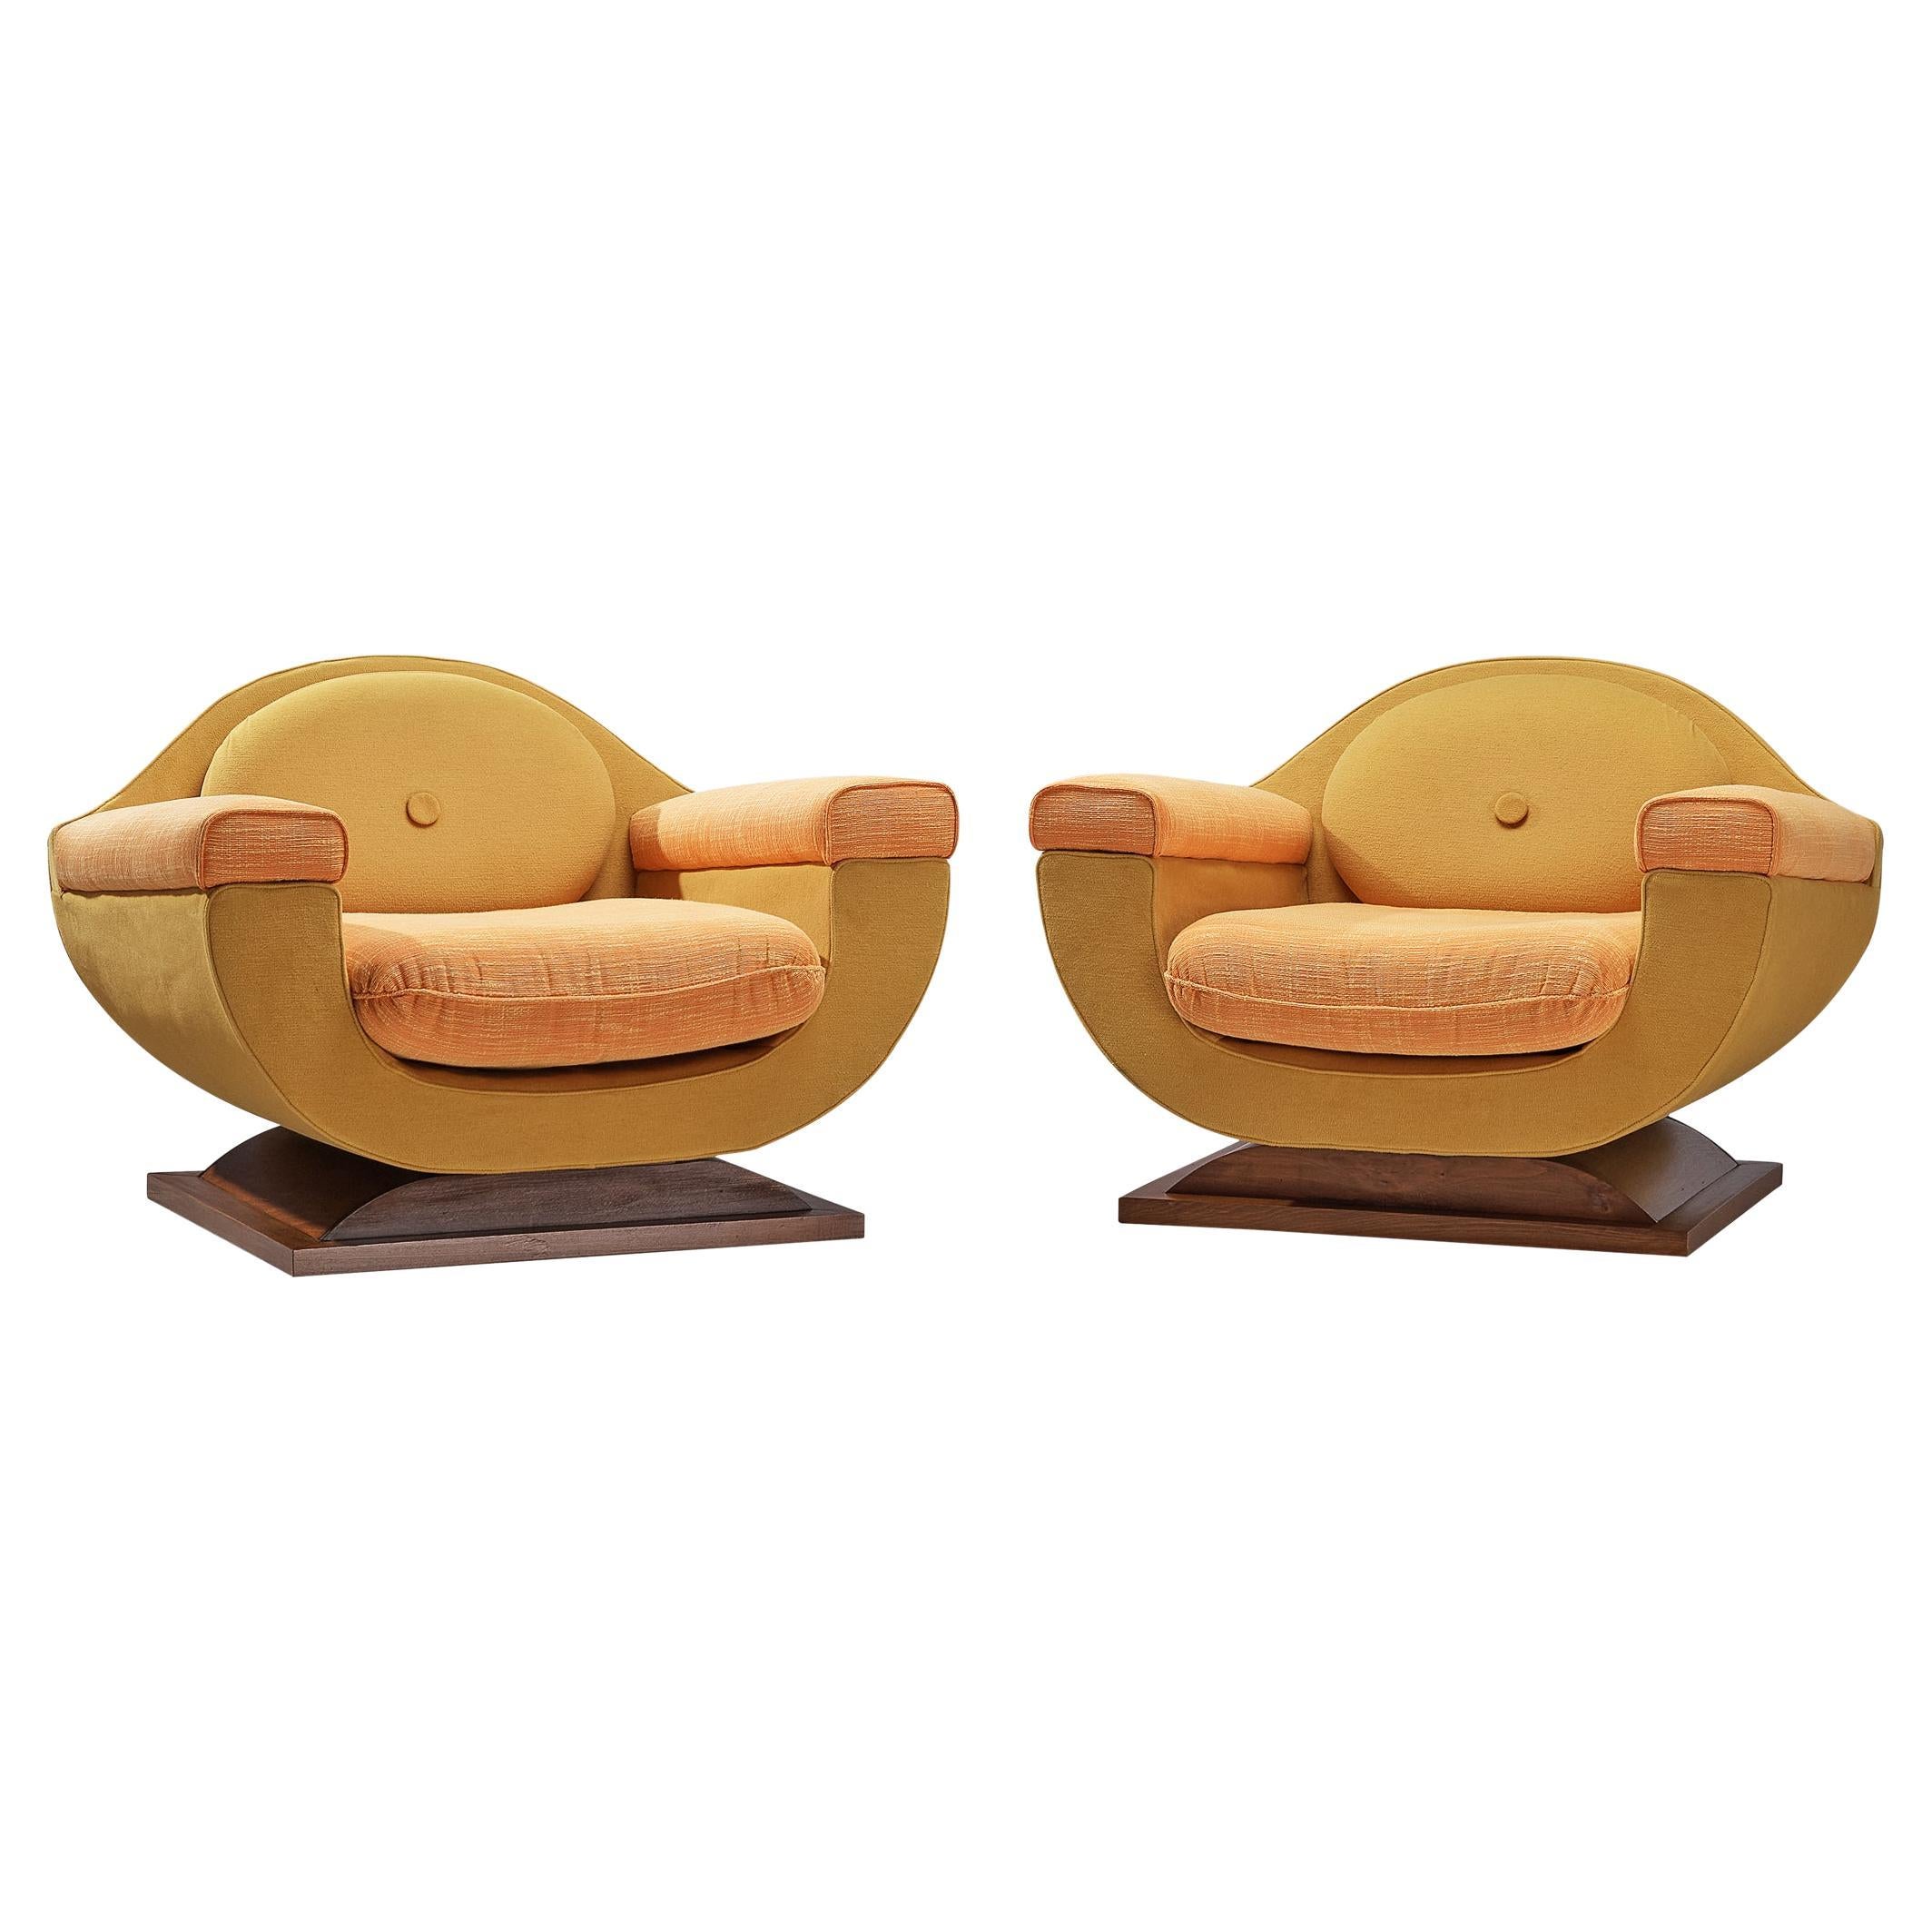 Italian Art Deco Pair of Lounge Chairs in Orange Yellow Upholstery  For Sale